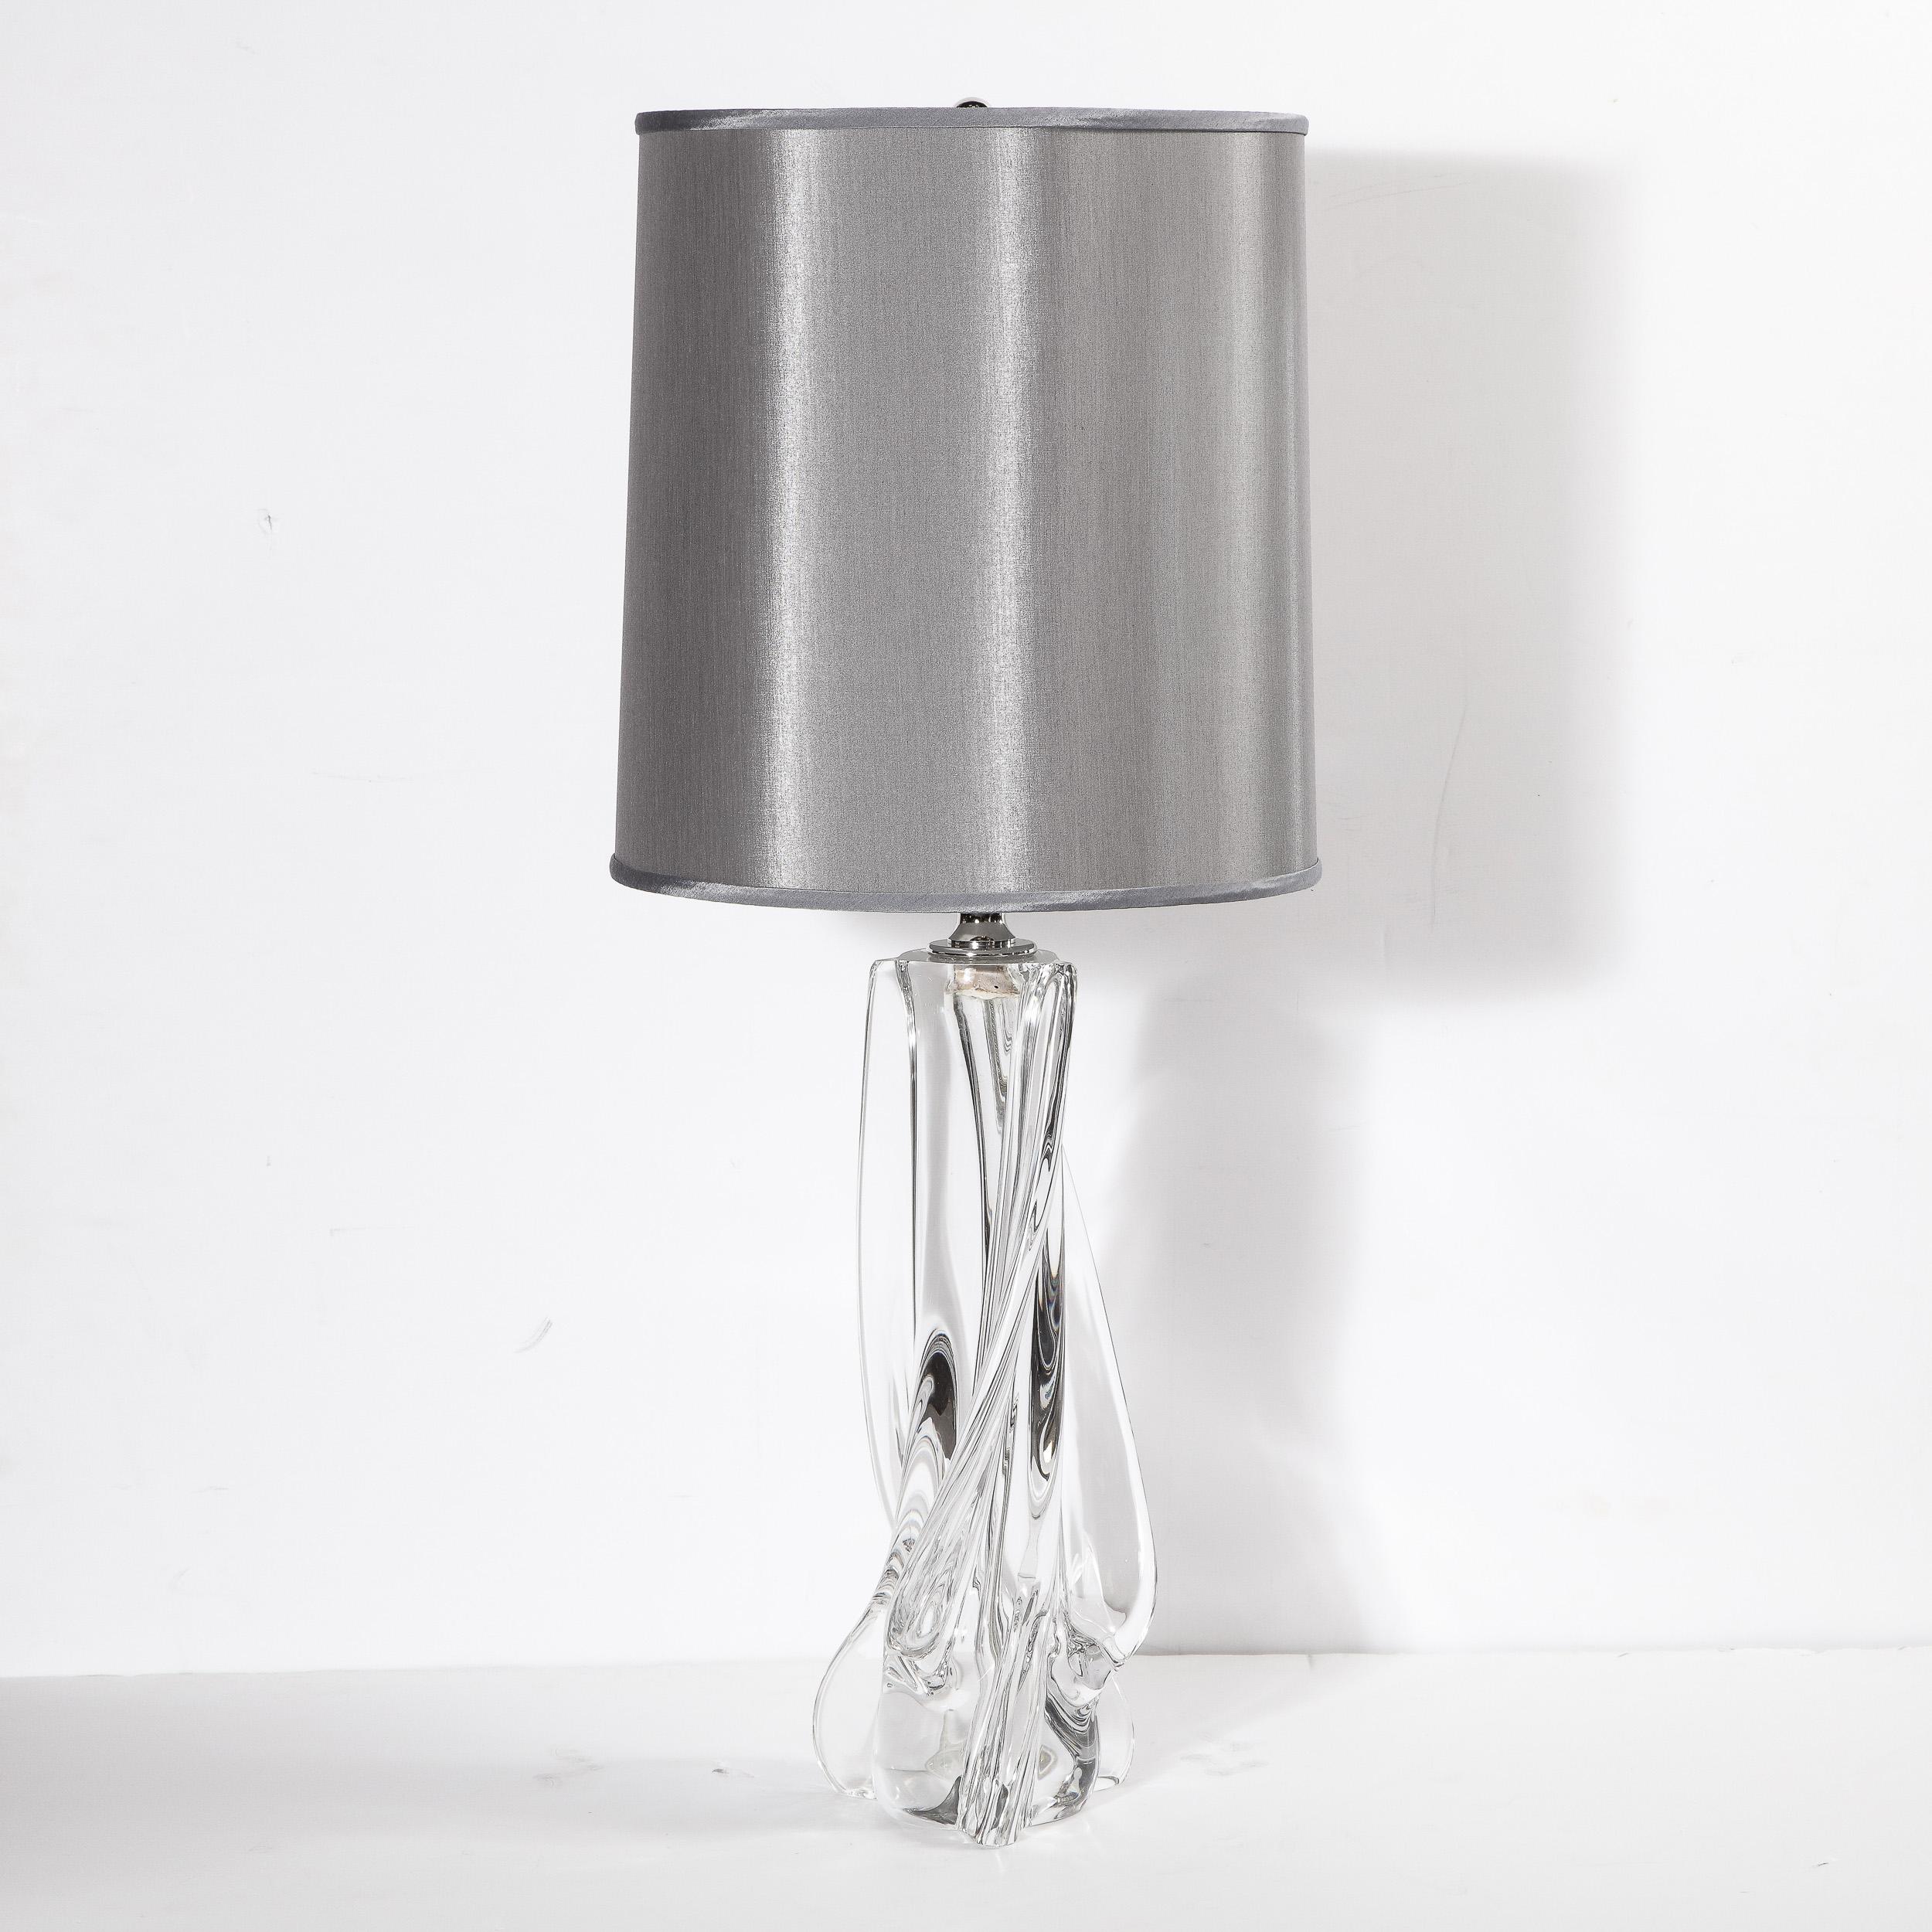 Mid-20th Century Hollywood Regency Sculptural Translucent Crystal Table Lamp Signed by Sevres For Sale